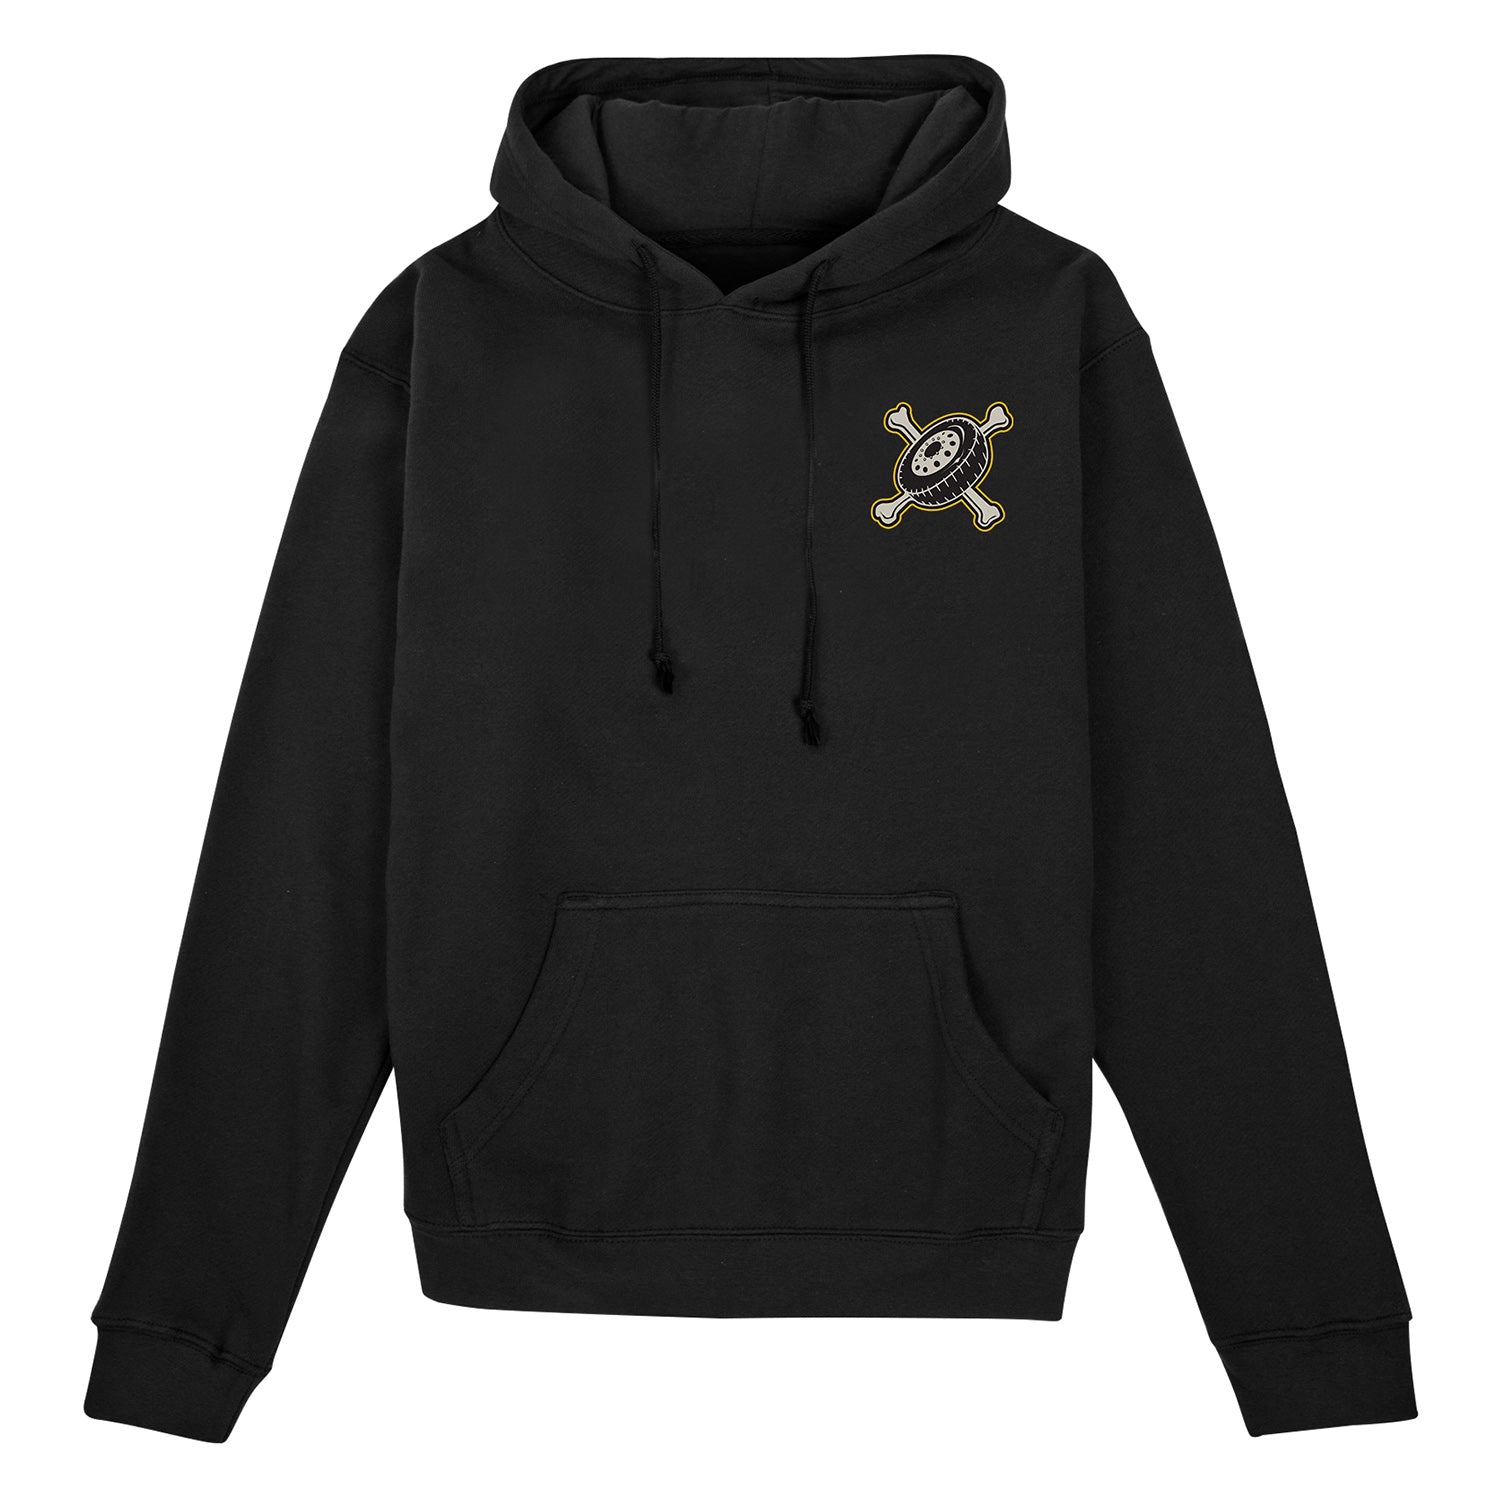 Call of Duty Black Tranzit Welcome Aboard Hoodie - Front View